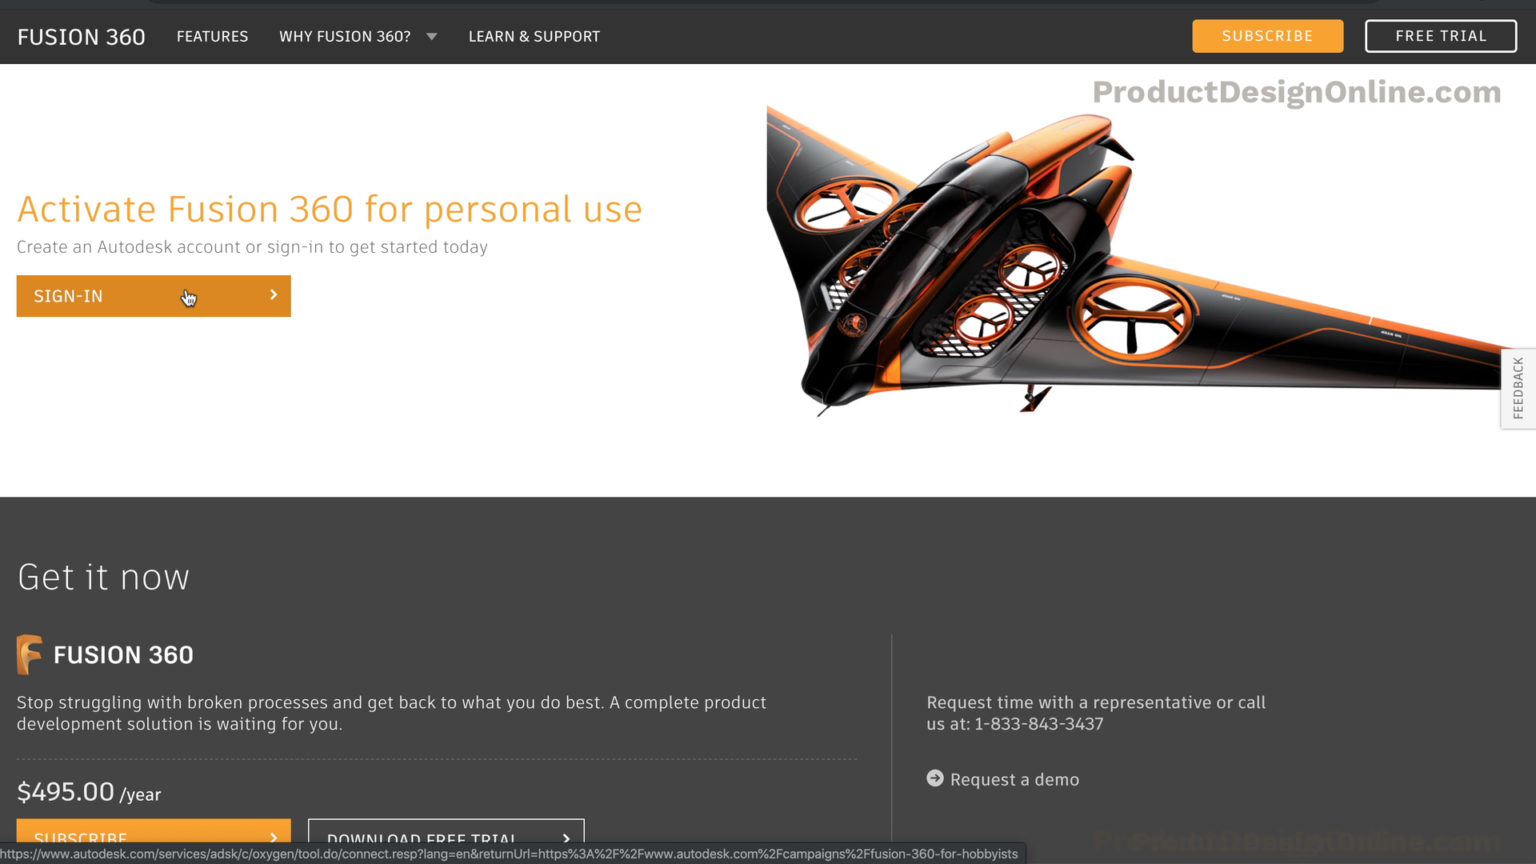 is fusion 360 free for hobbyists